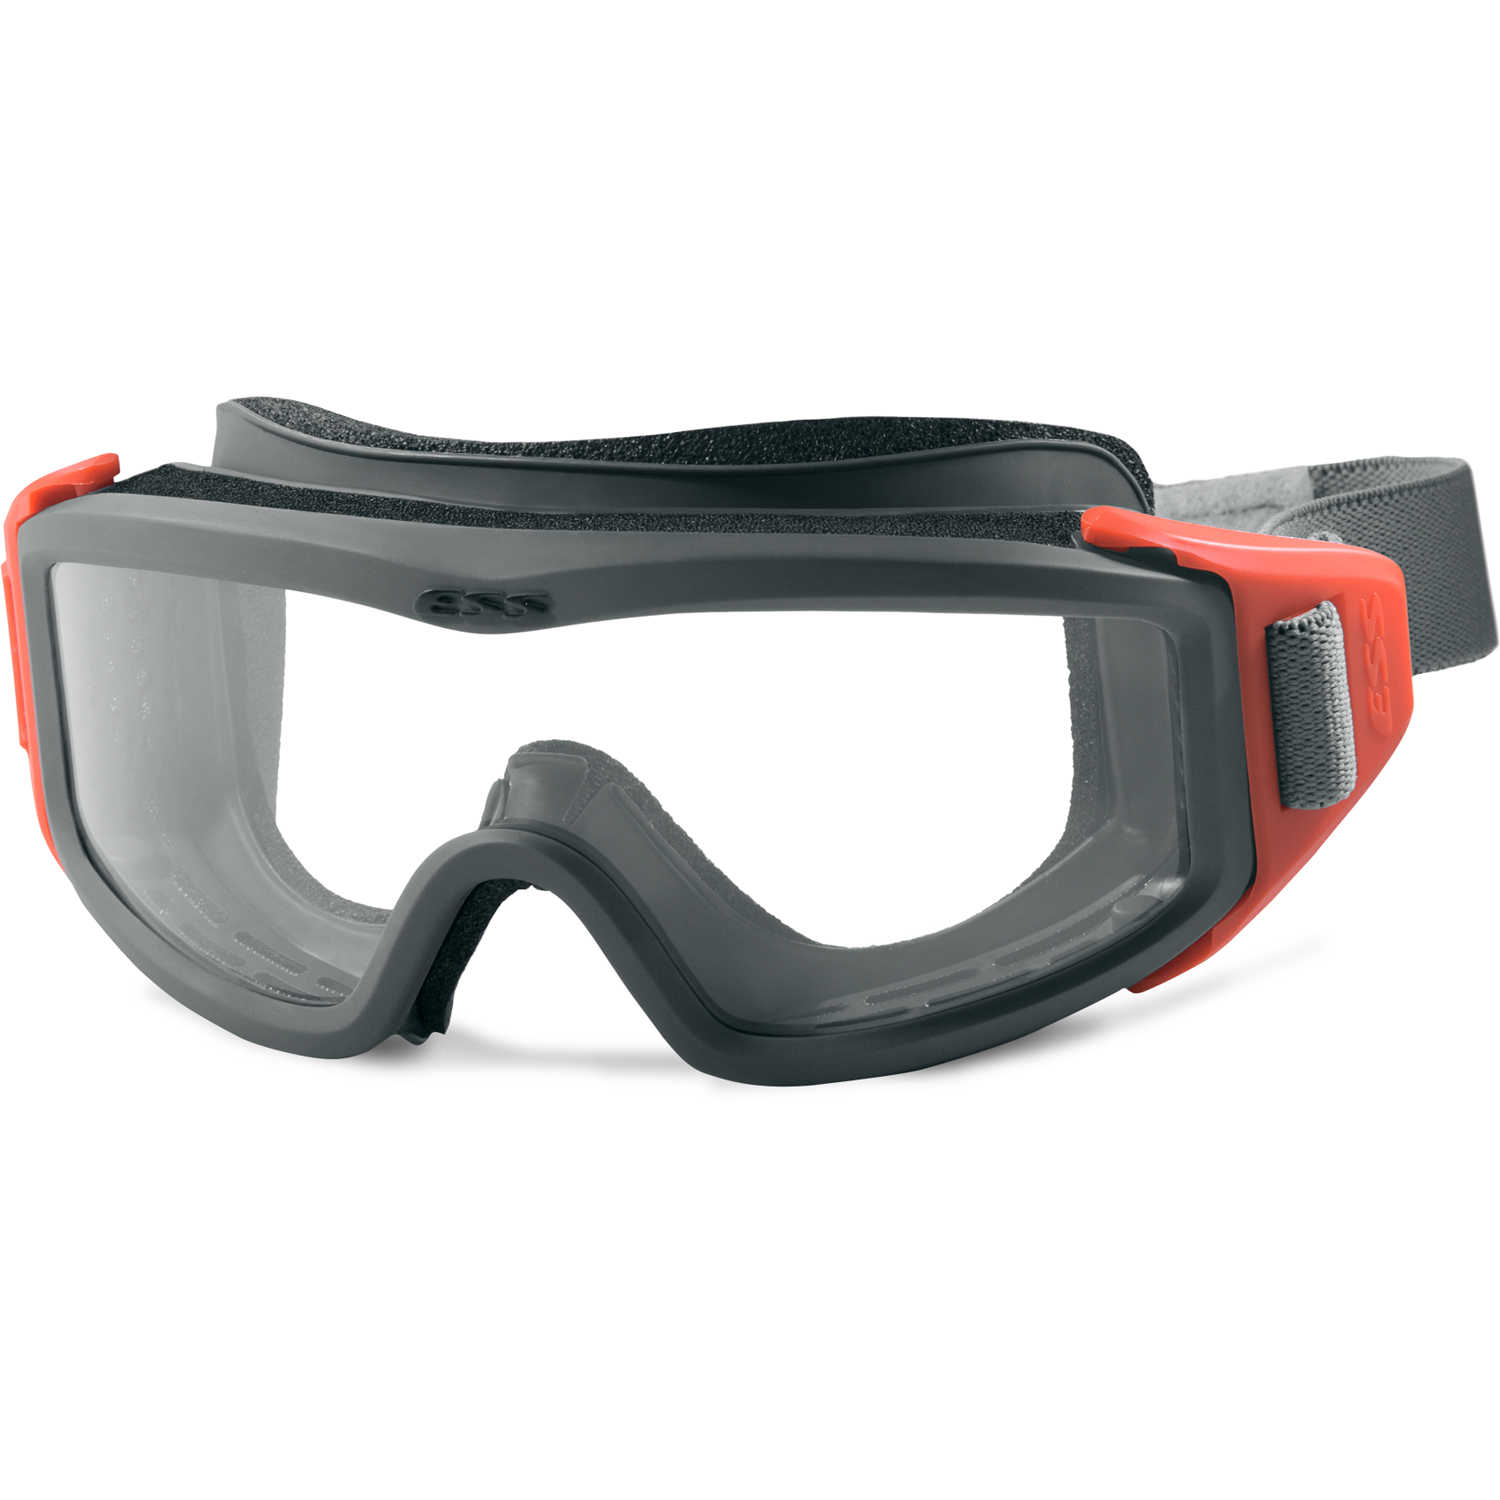 USA ESS Wildland Firefighting GOGGLES NFPA Compliant 